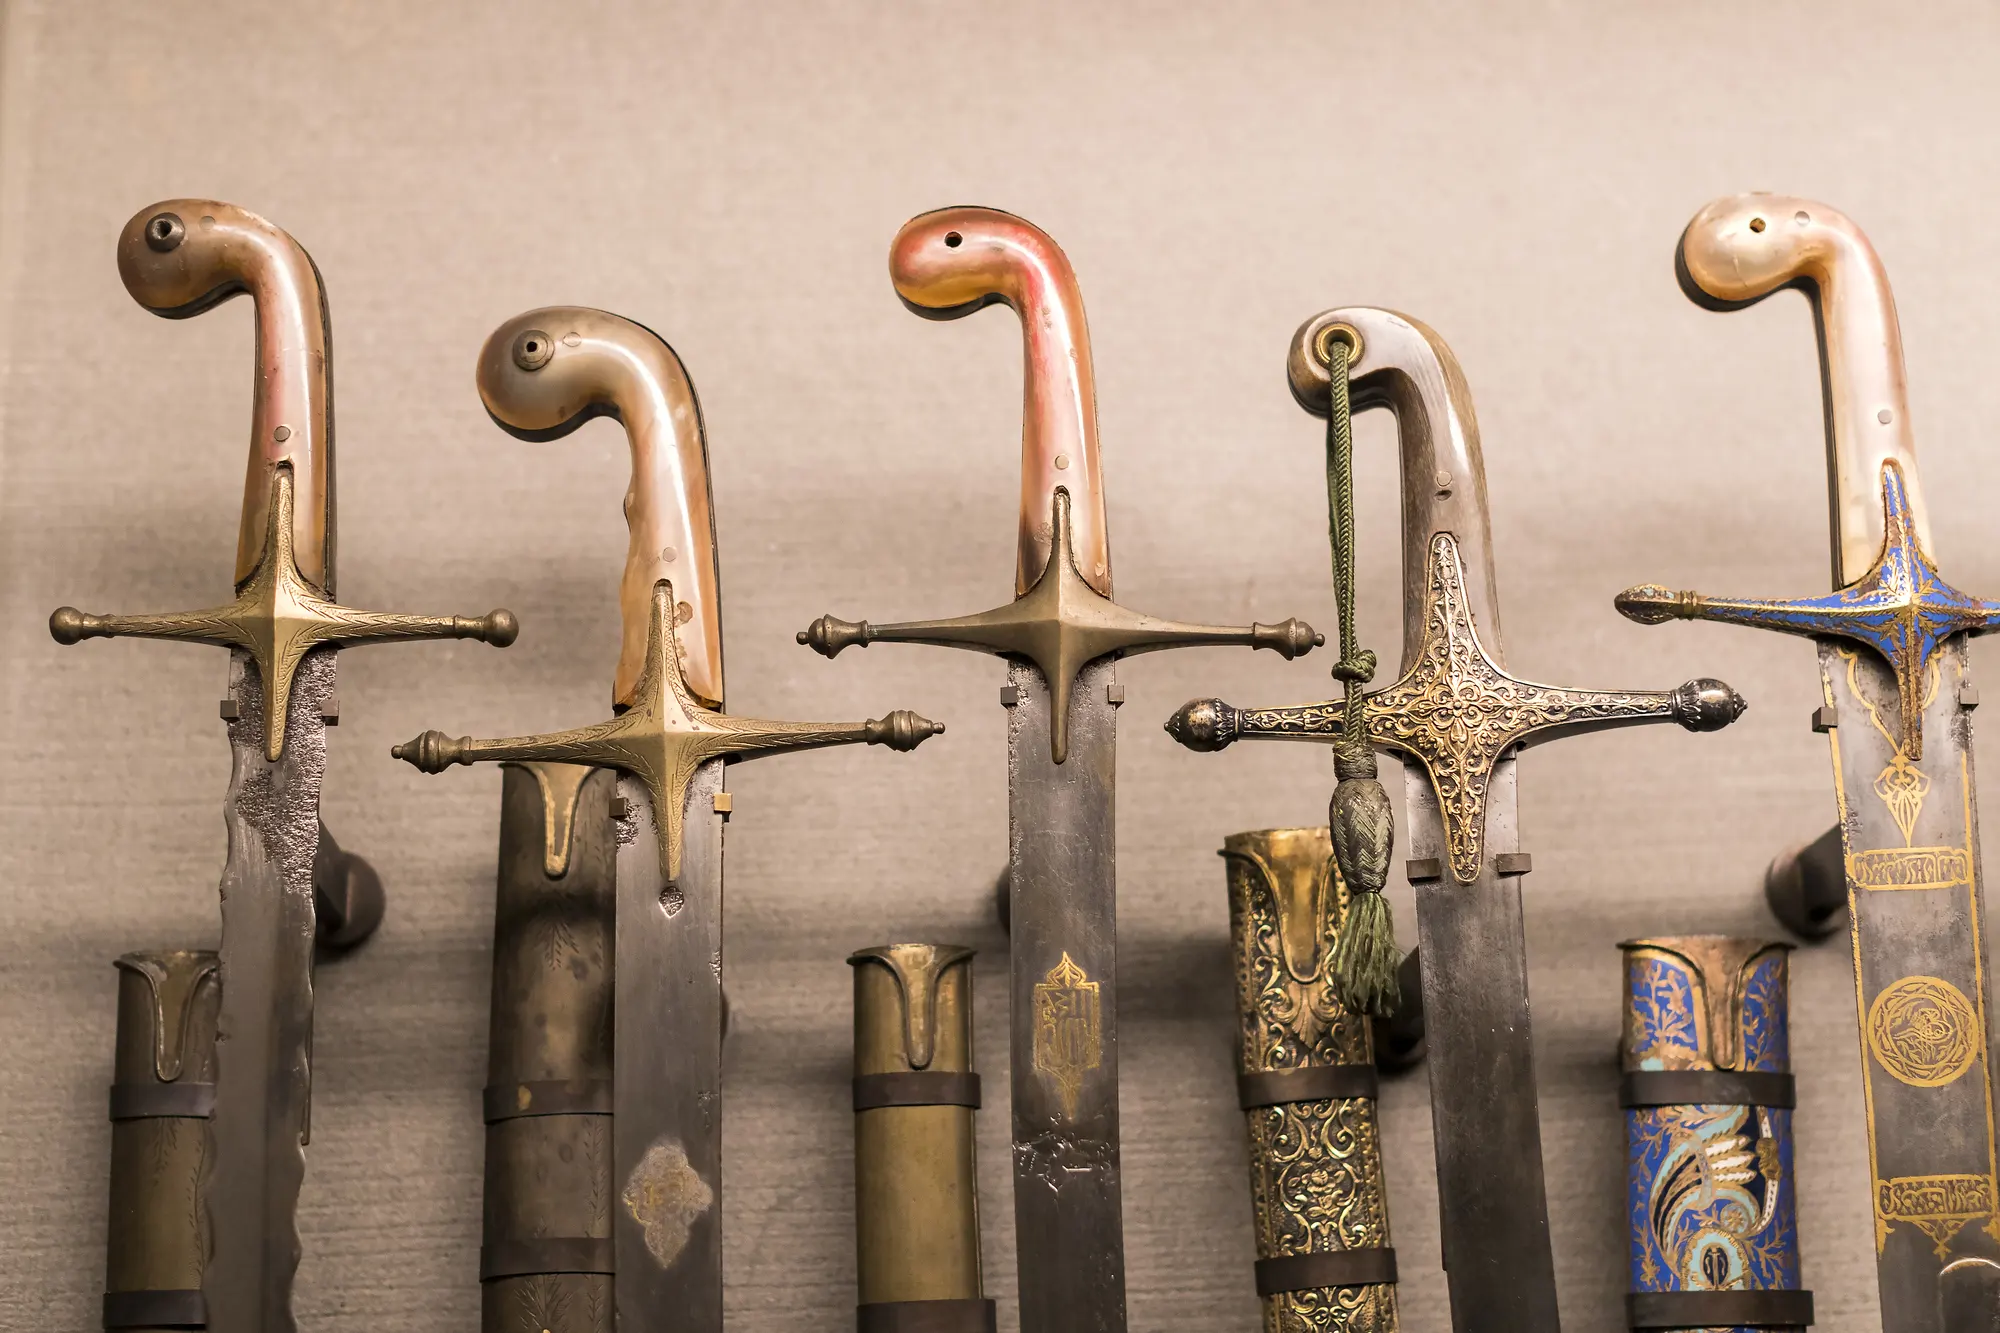 Turkish sabre swords hanging on a wall, featuring curved blades and decorative handles.